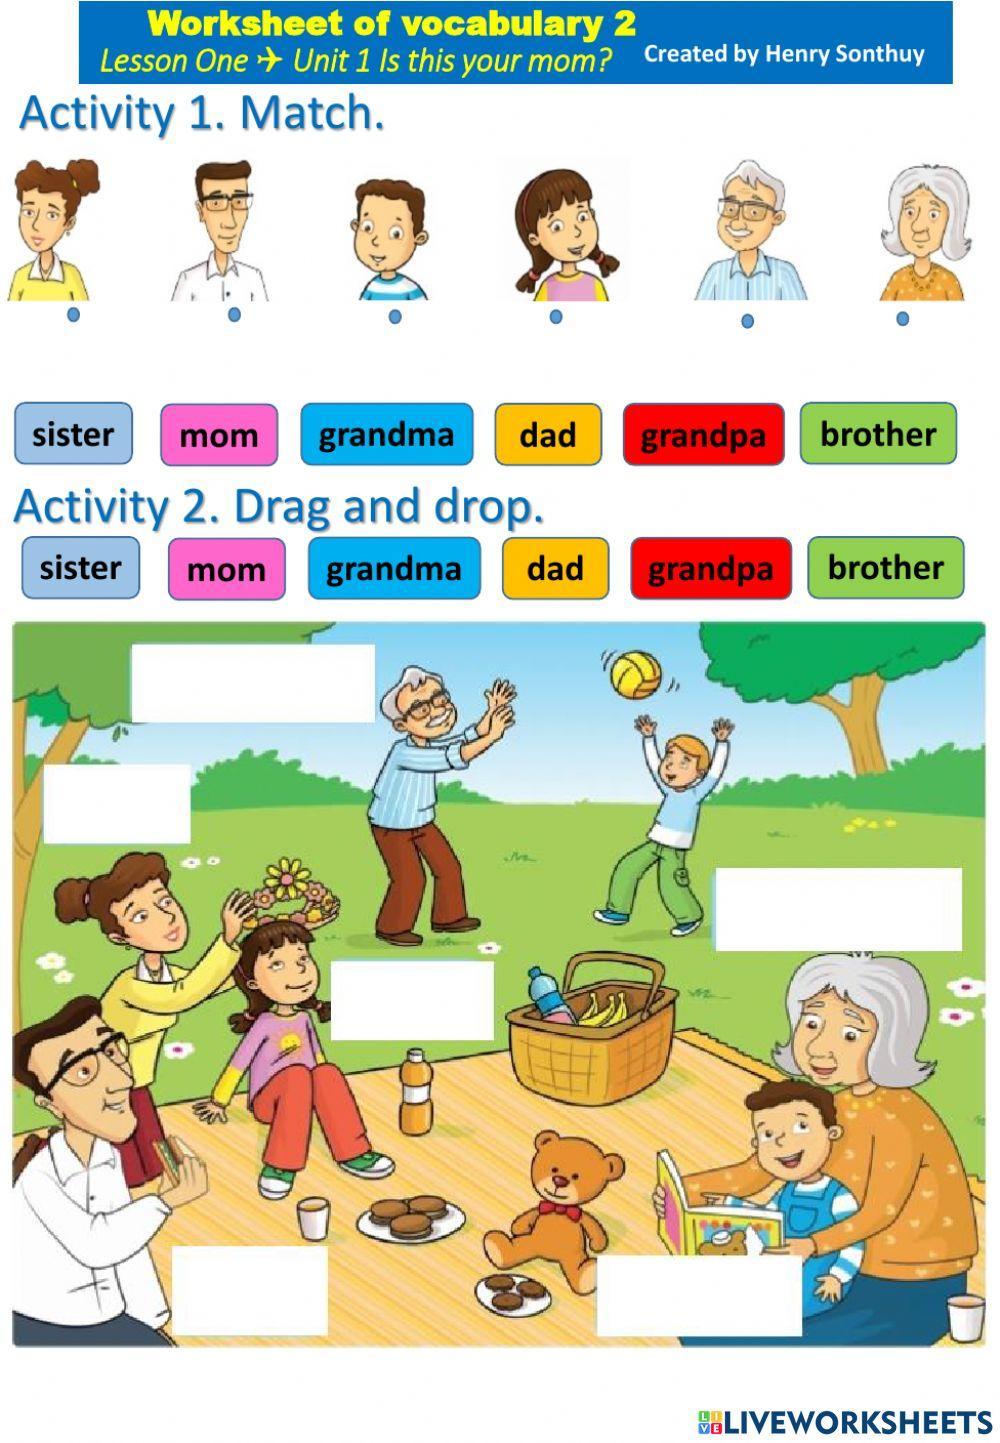 Worksheet of vocabulary 2-Lesson One -Unit 1 Is this your mom?